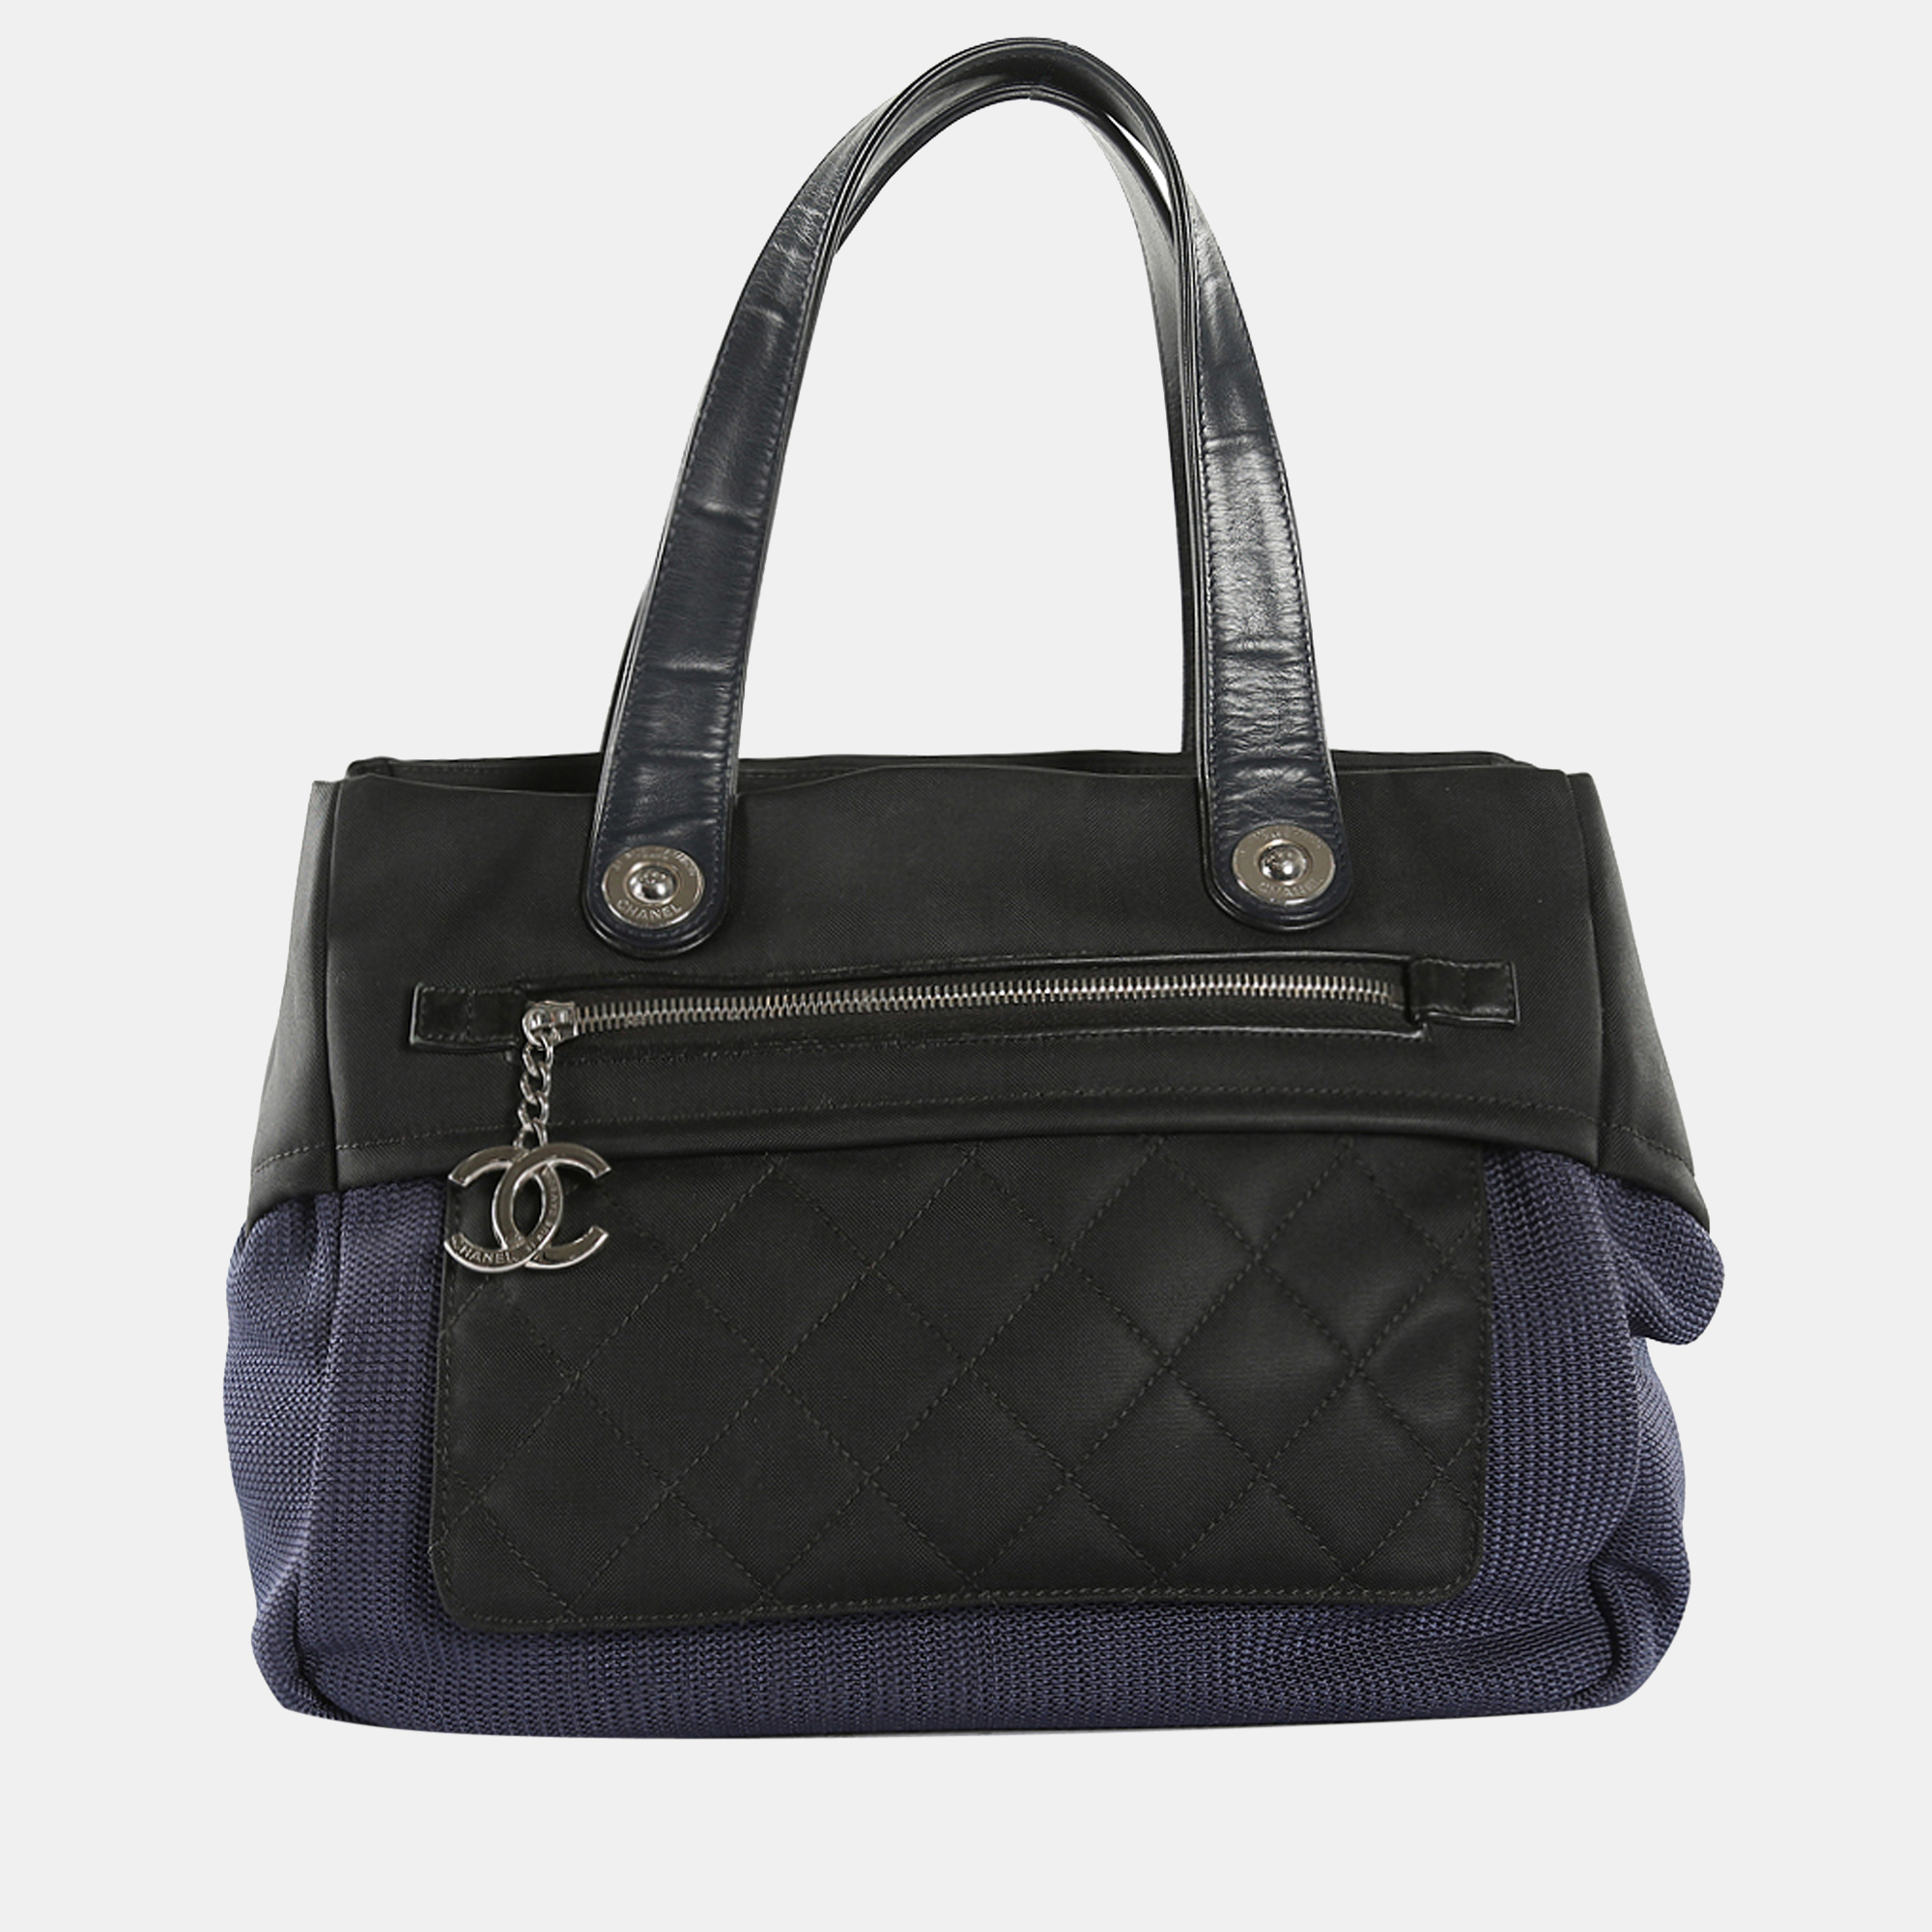 Chanel Navy Blue/Black Knit & Canvas Tote Bag